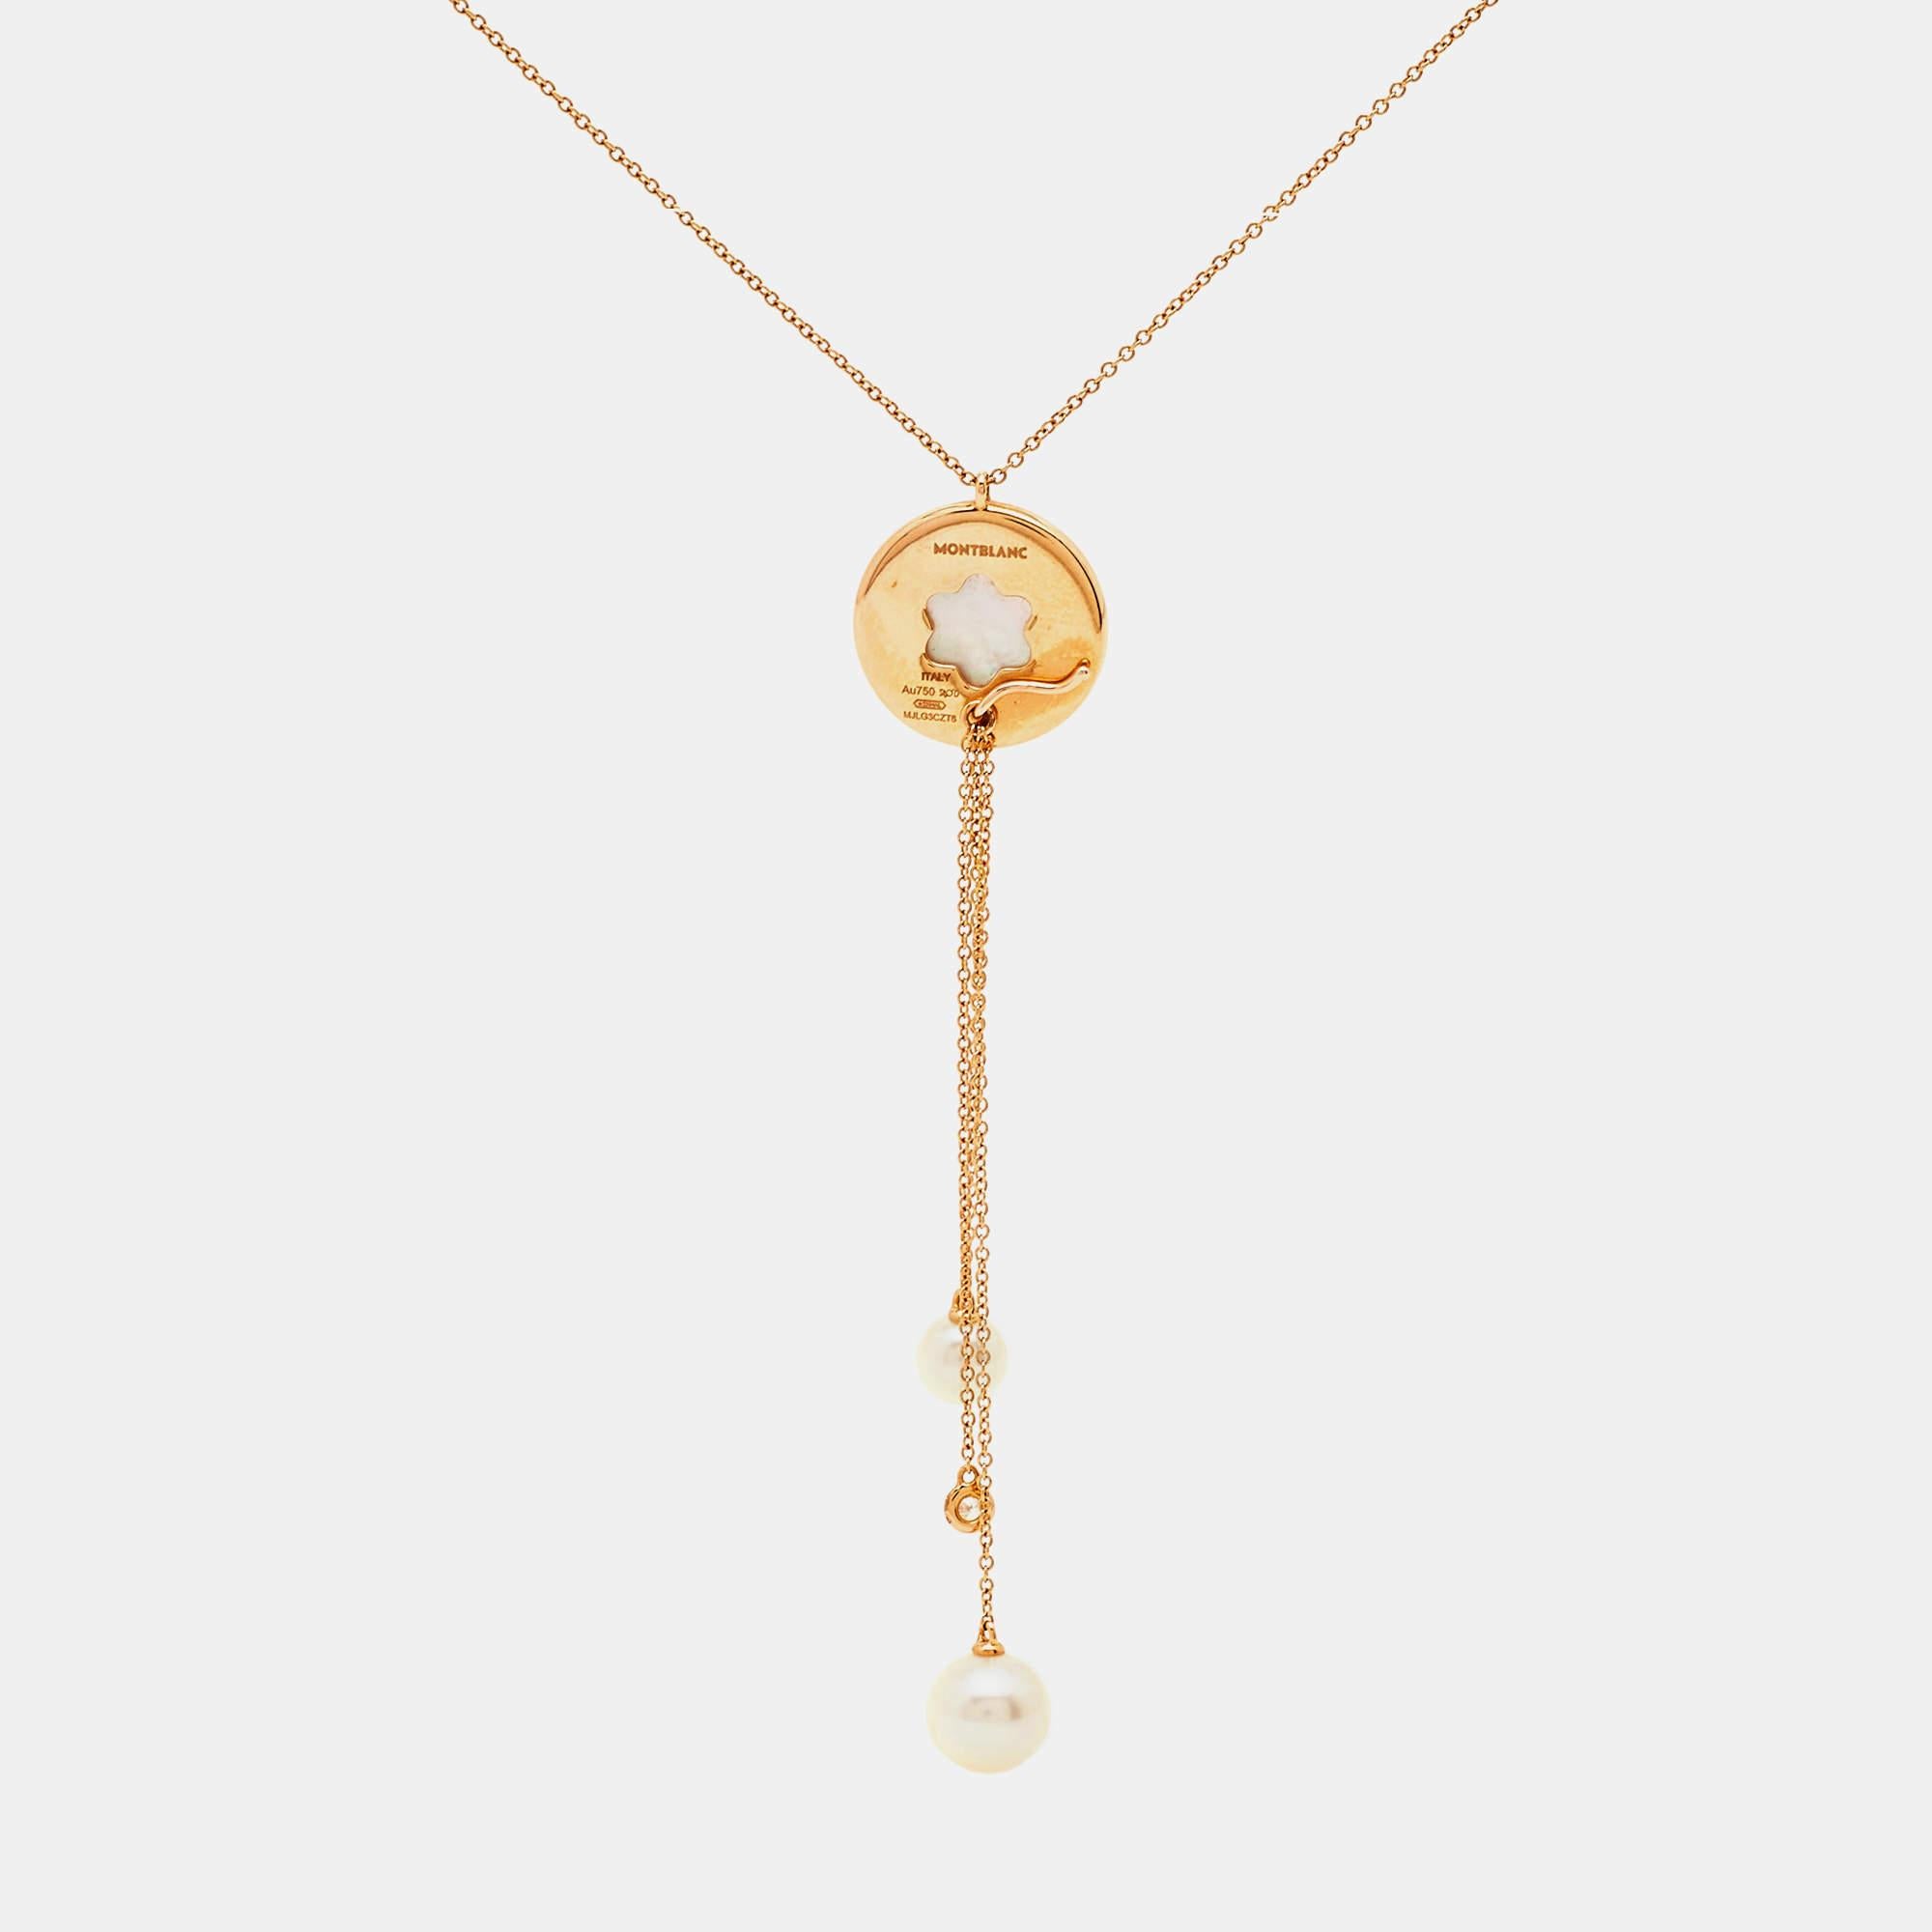 We can't stop admiring this beauty from Montblanc! Beautifully crafted from precious 18k rose gold, this necklace is a stunner. It has a pendant is inlaid with mother of pearl and carries the iconic star emblem. It is further styled with dangling